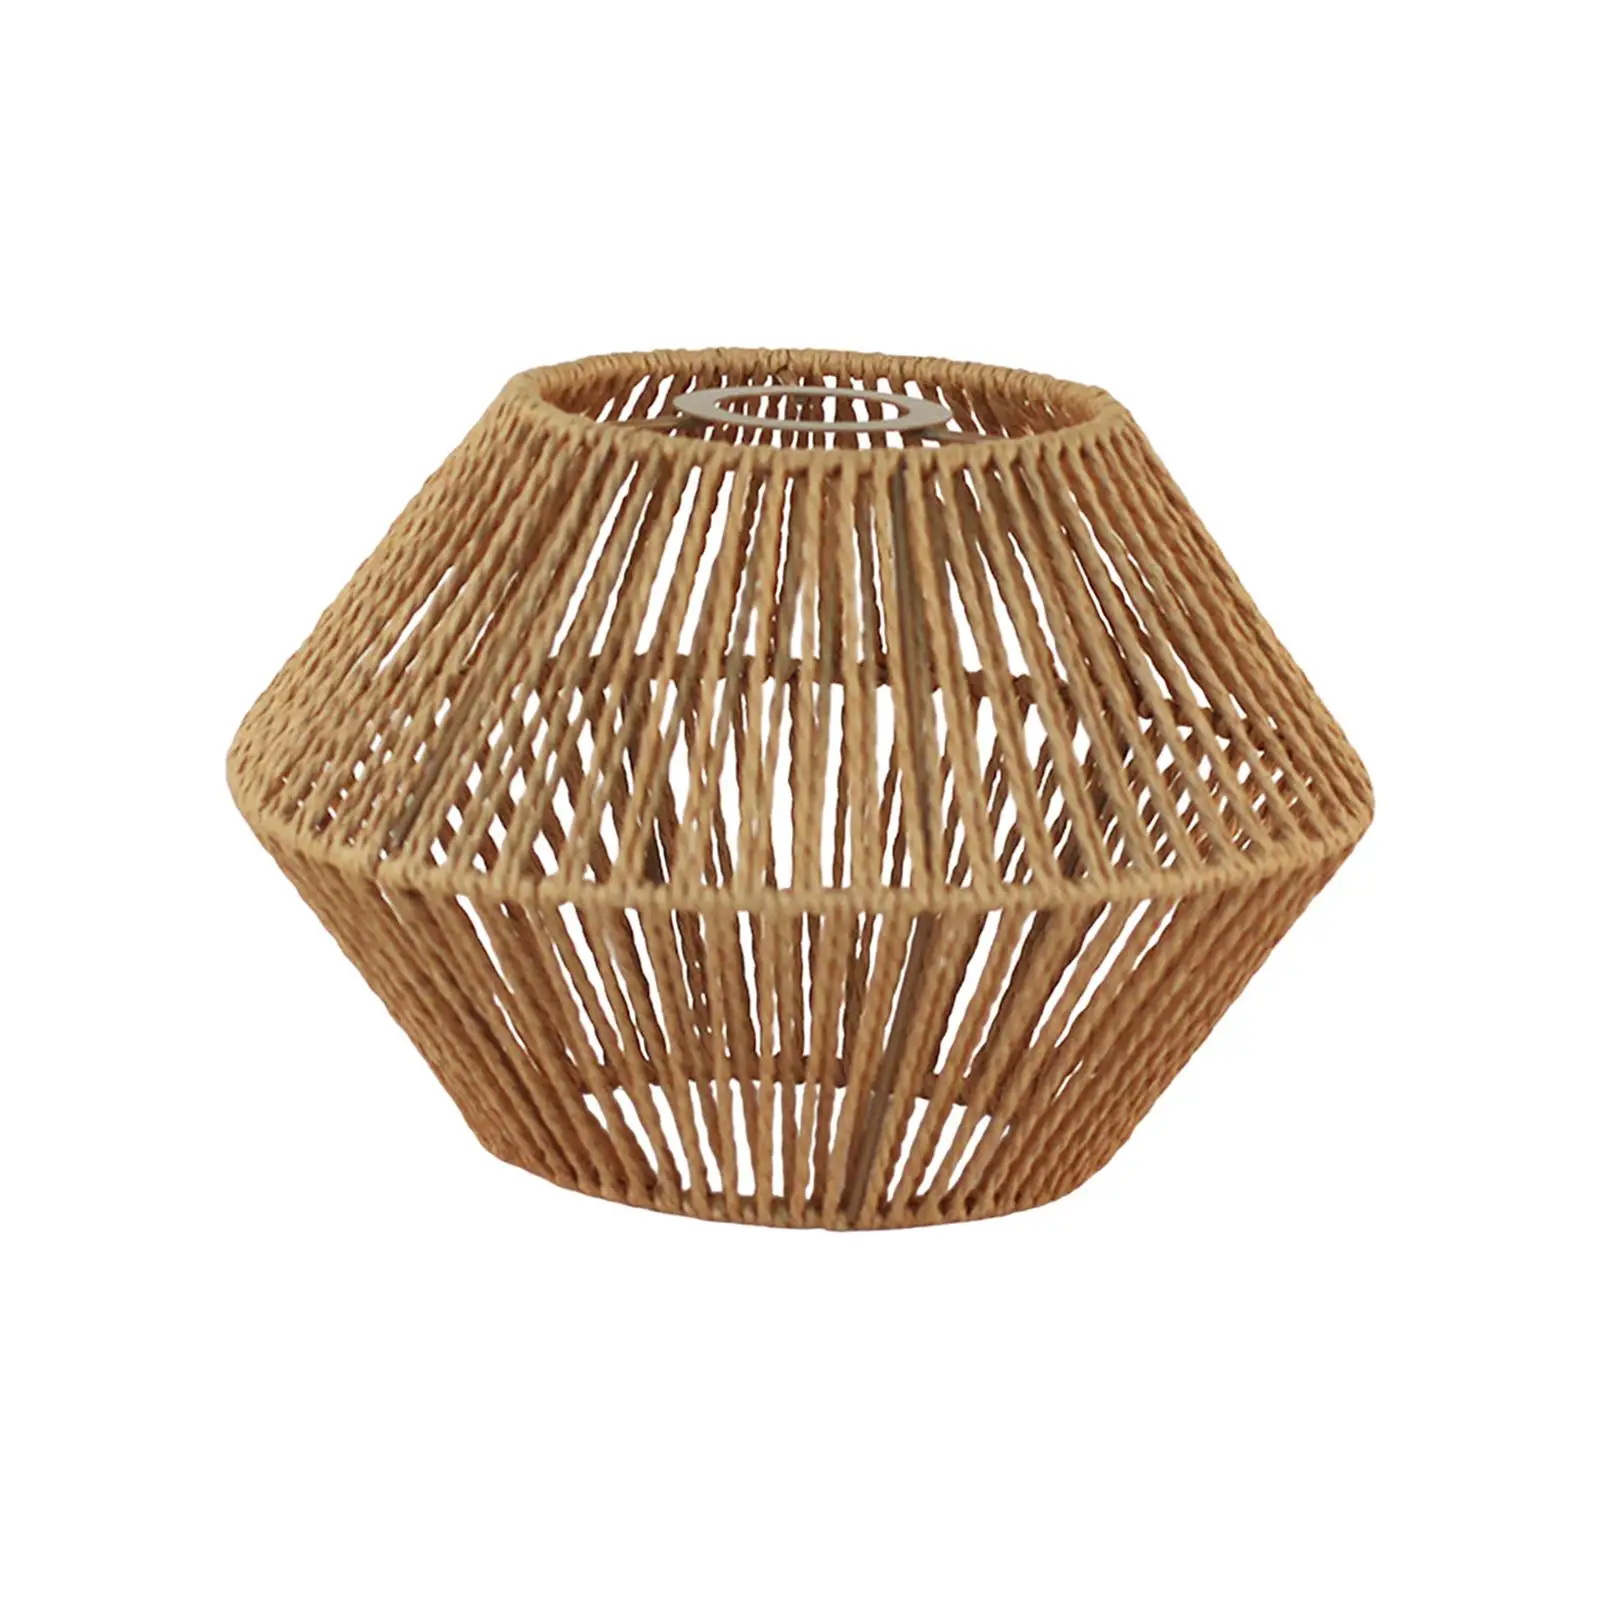 Rope Woven Hanging Lampshade Light Shade Handmade Sturdy Retro Chandelier Cover Lamp Shade Light Fixture for Kitchen Bedroom